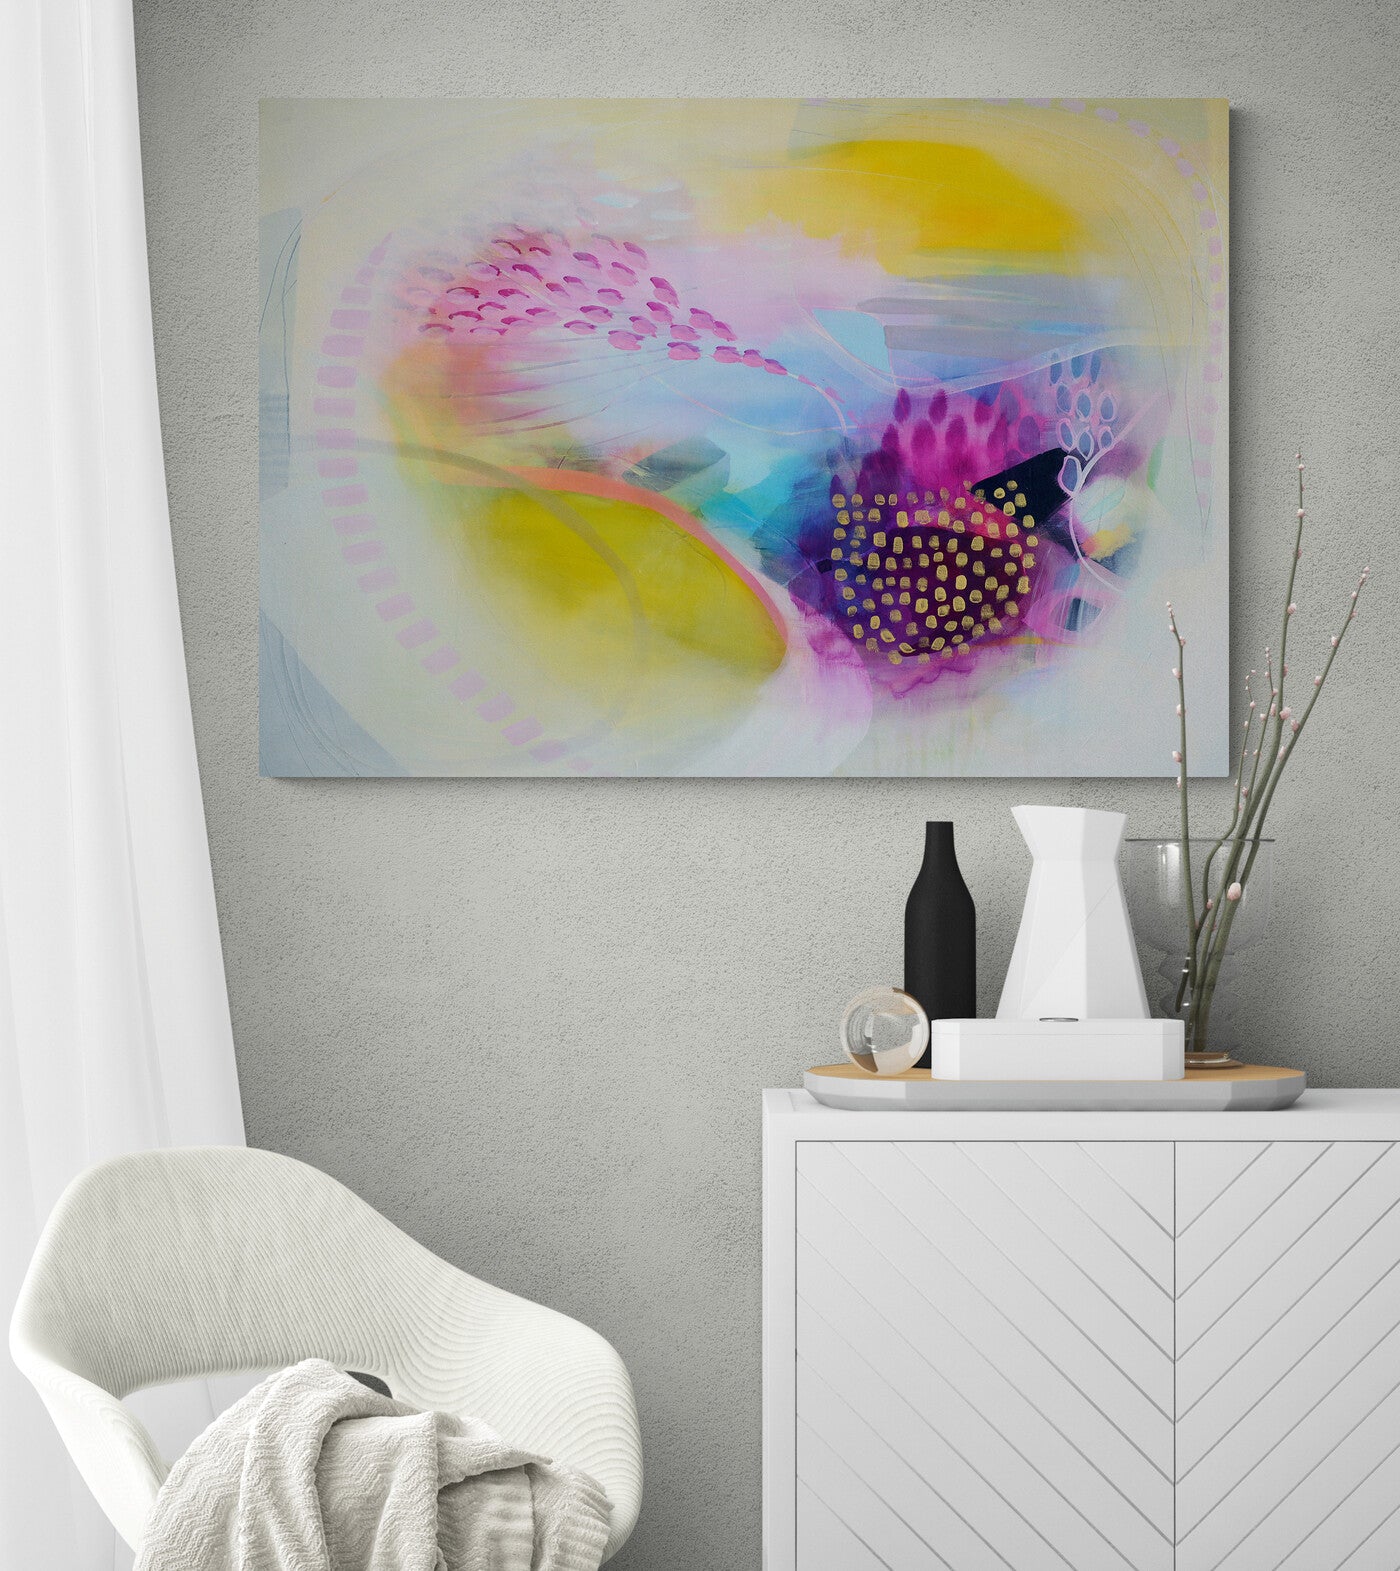 Expressive Abstract Wall Art Print in shades of Yellow, Pink and Blue